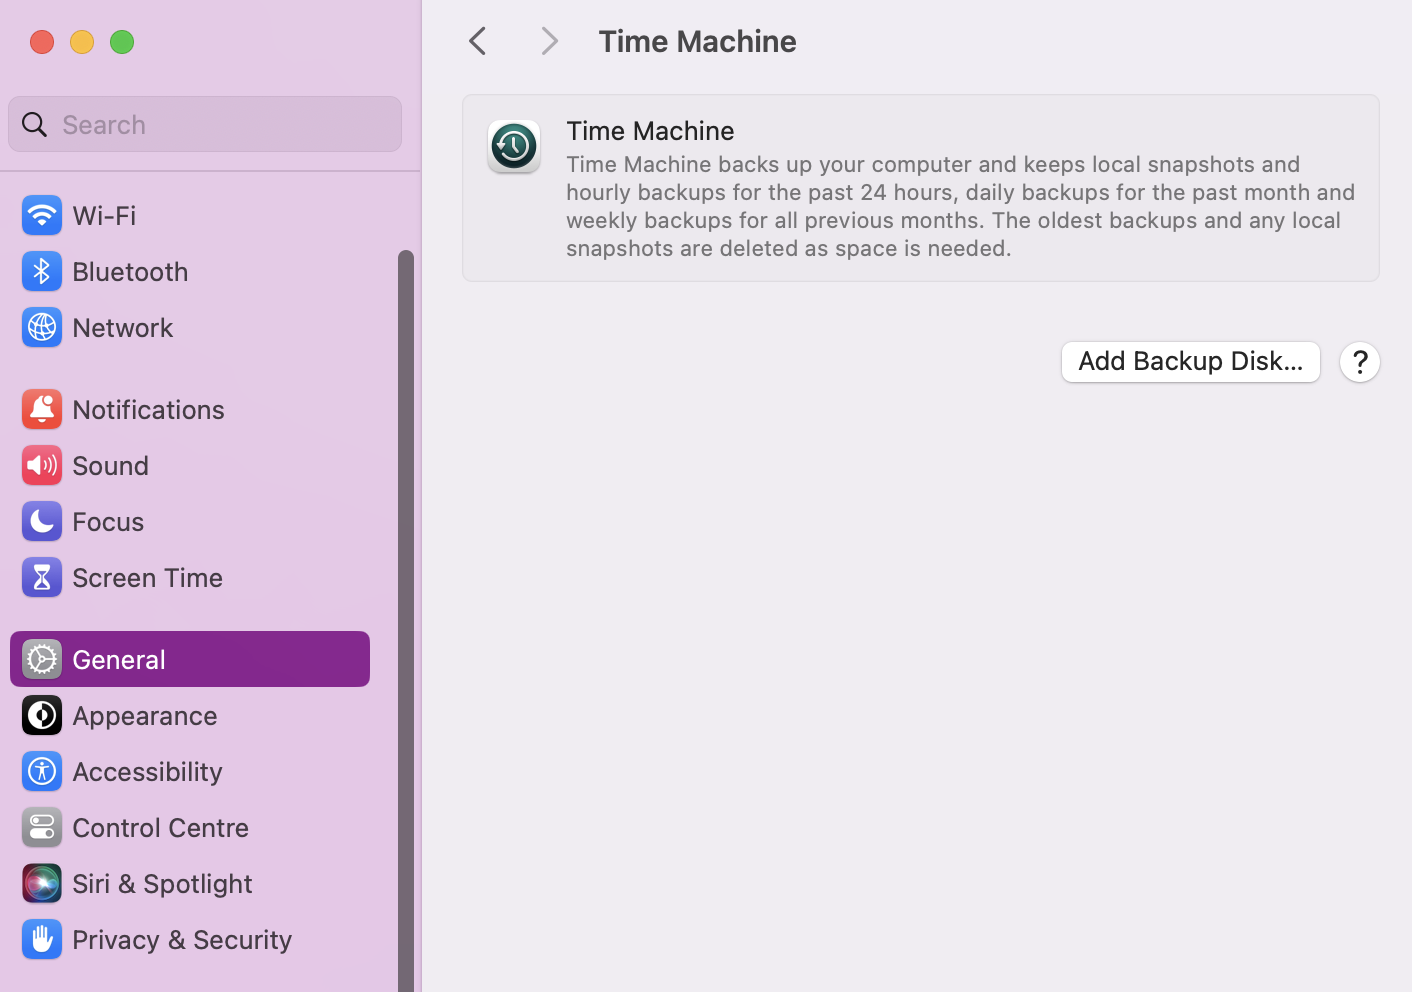 To get your backups ready with macOs built-in Time Machine, first open System Settings. Then scroll down to General and click Time Machine.